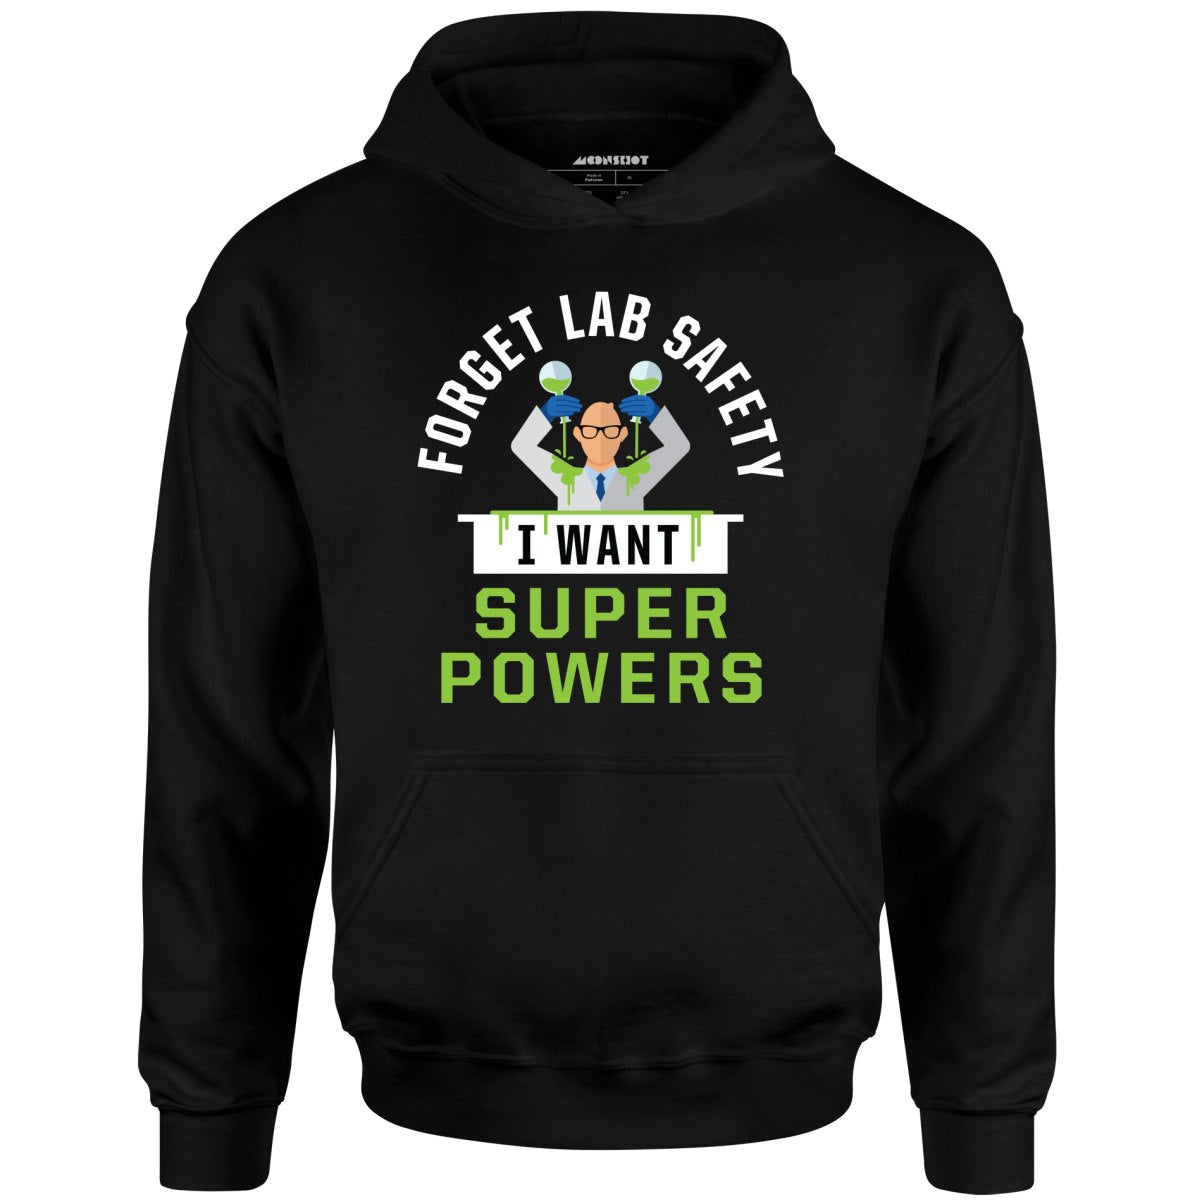 Forget Lab Safety I Want Super Powers - Unisex Hoodie